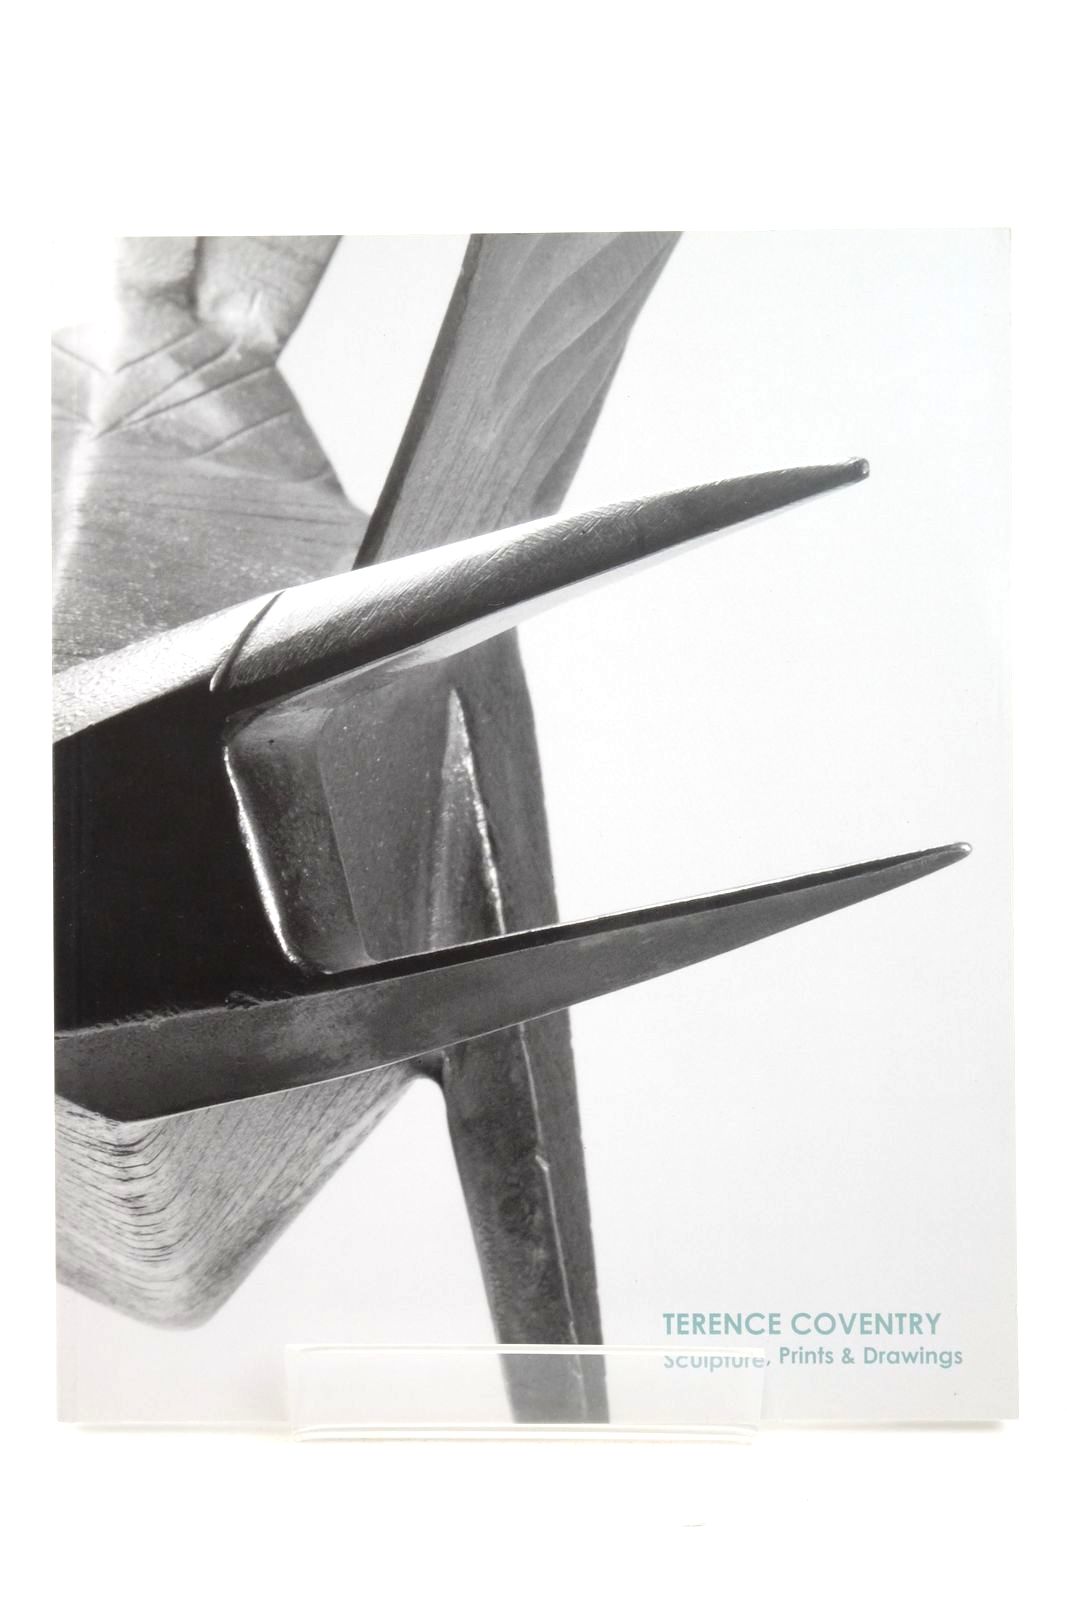 Photo of TERENCE COVENTRY: SCULPTURE, PRINTS & DRAWINGS- Stock Number: 2136708